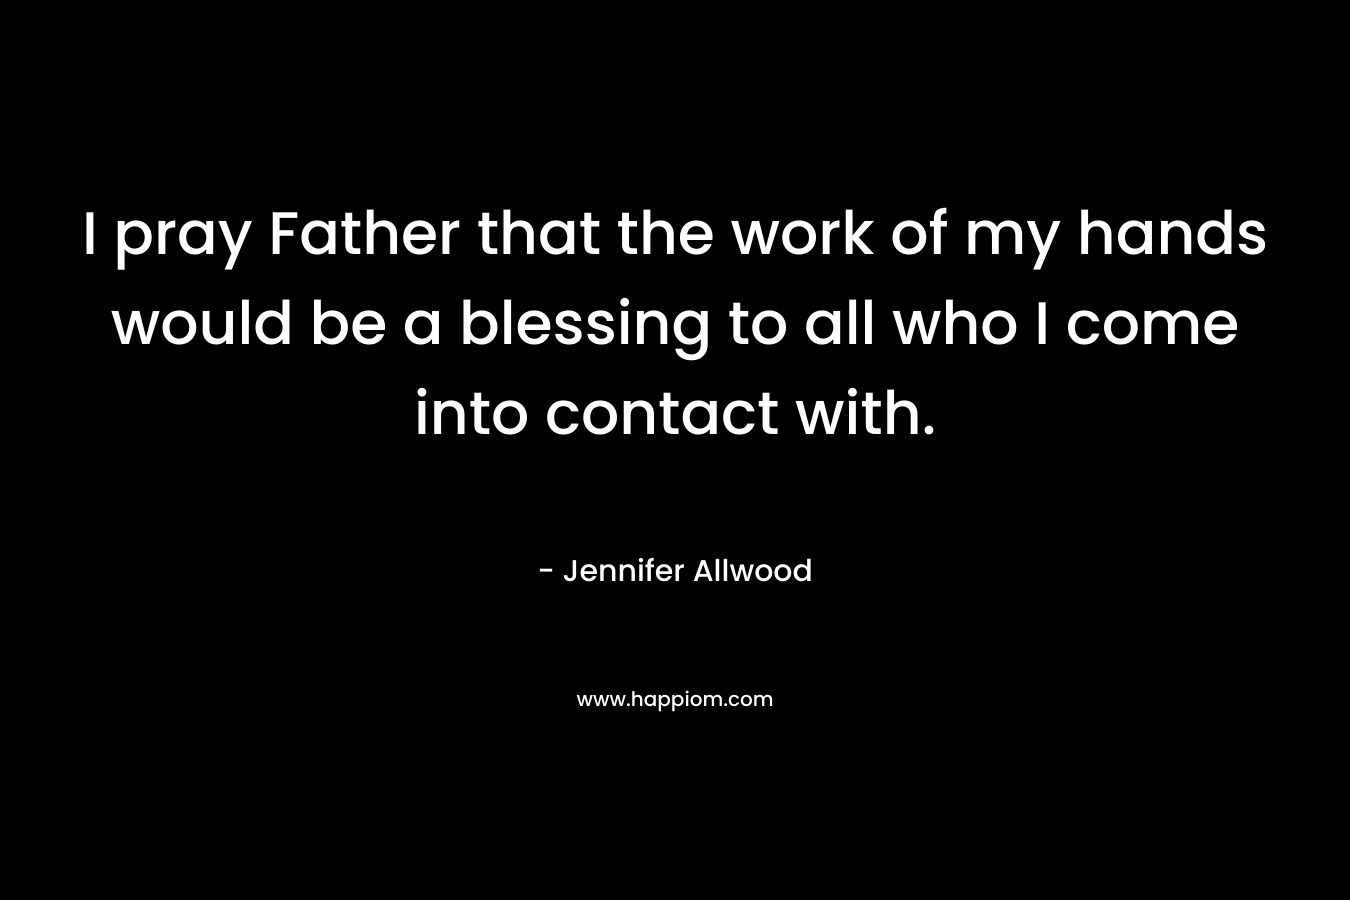 I pray Father that the work of my hands would be a blessing to all who I come into contact with. – Jennifer Allwood